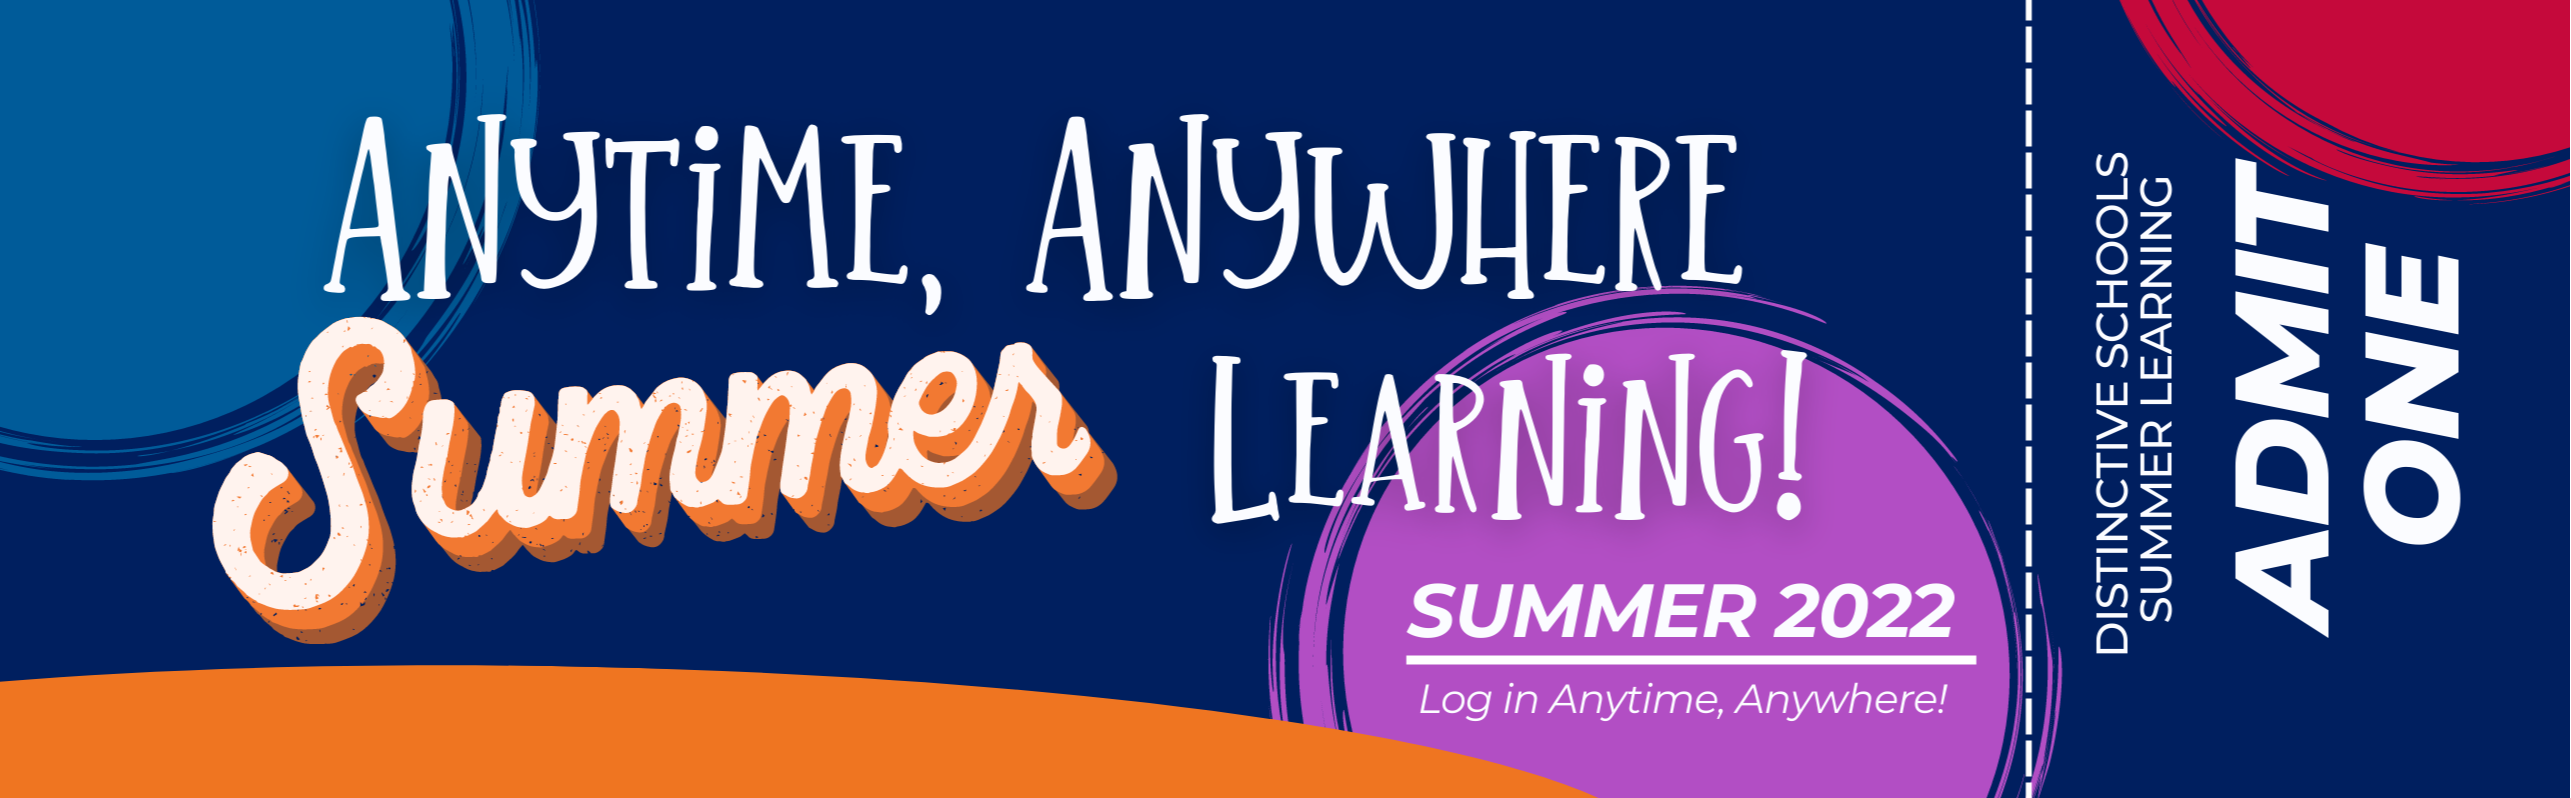 Admit One: Anytime, Anywhere Summer Learning!